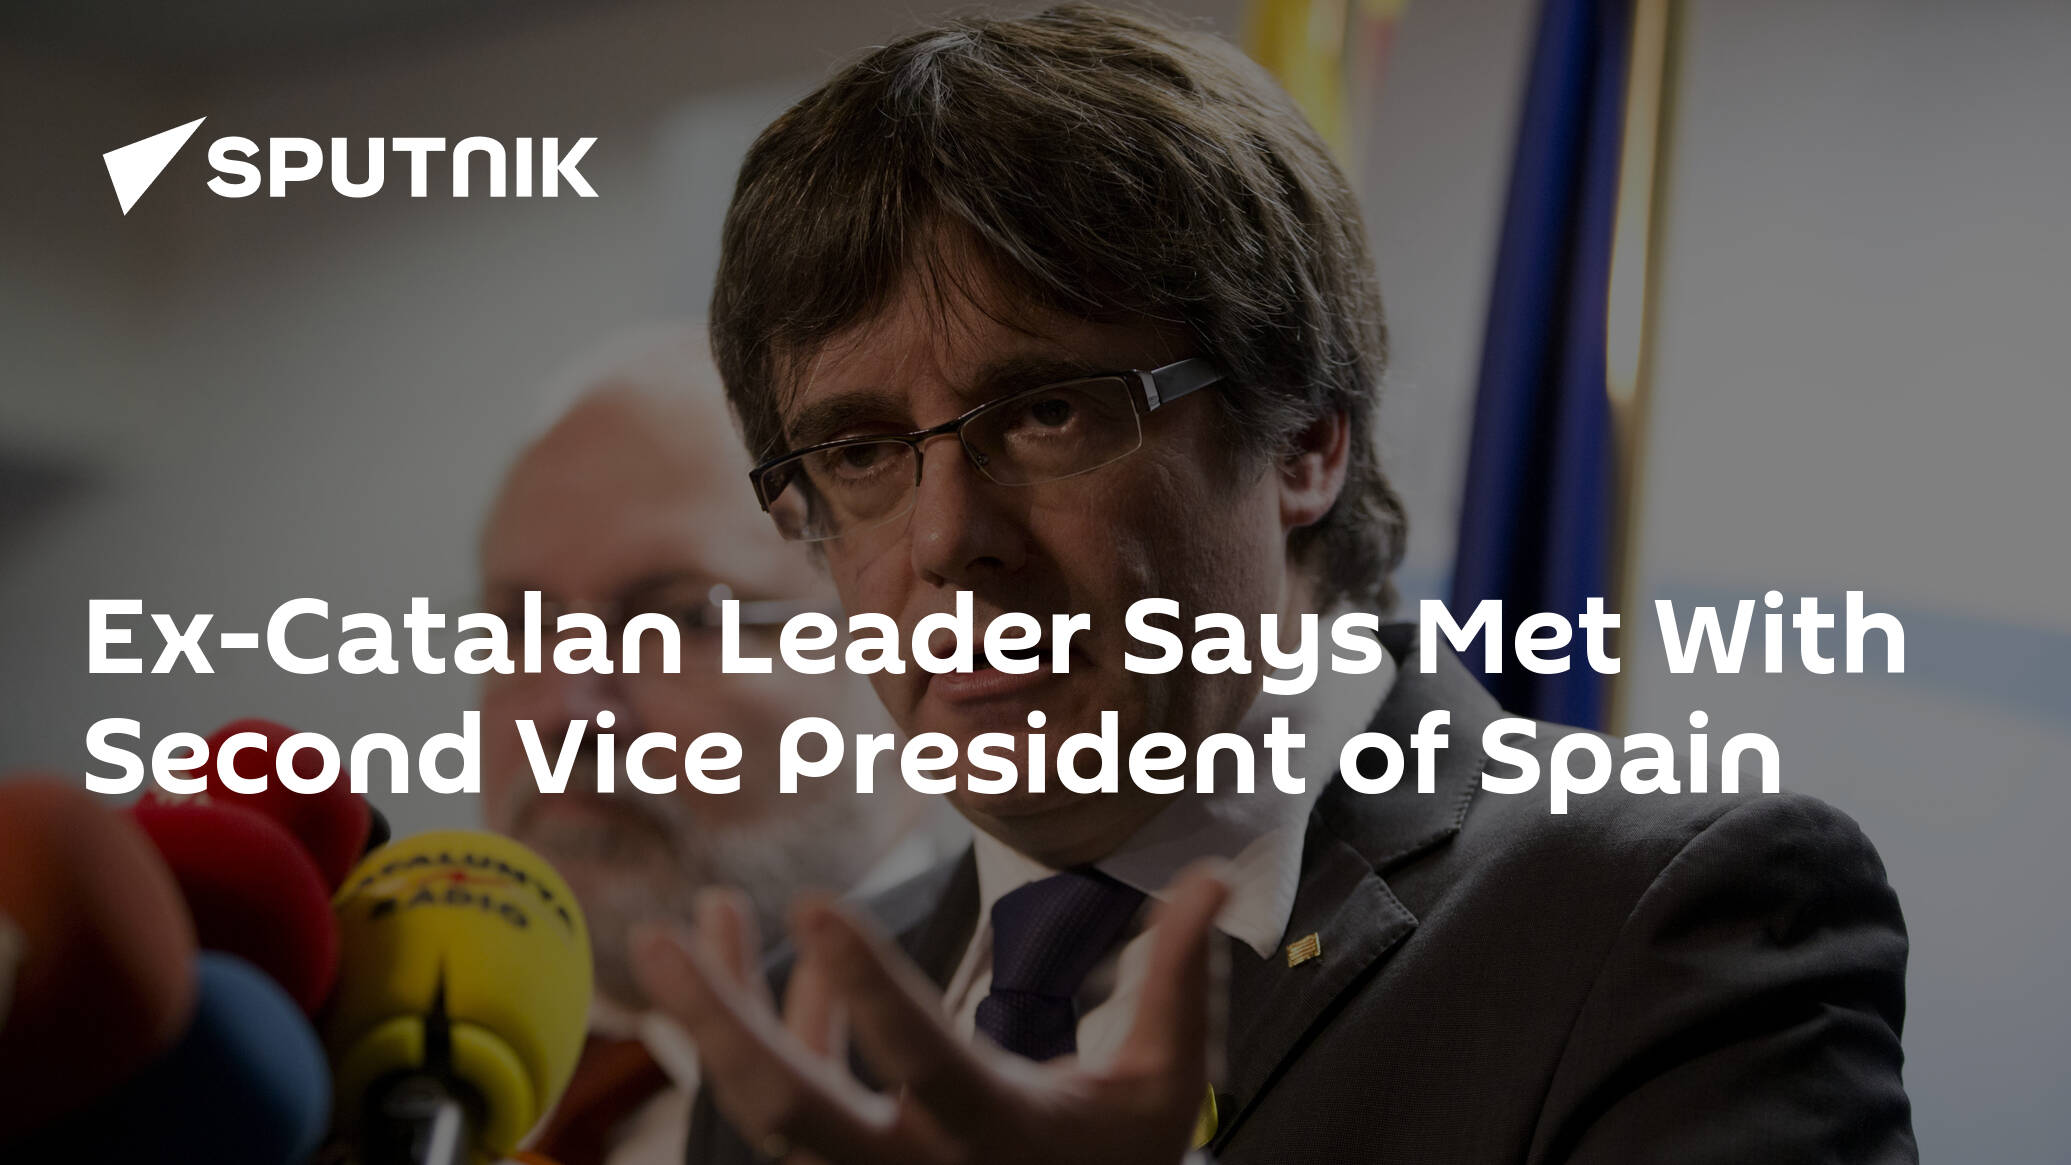 Ex-Catalan Leader Says Met With Second Vice President of Spain